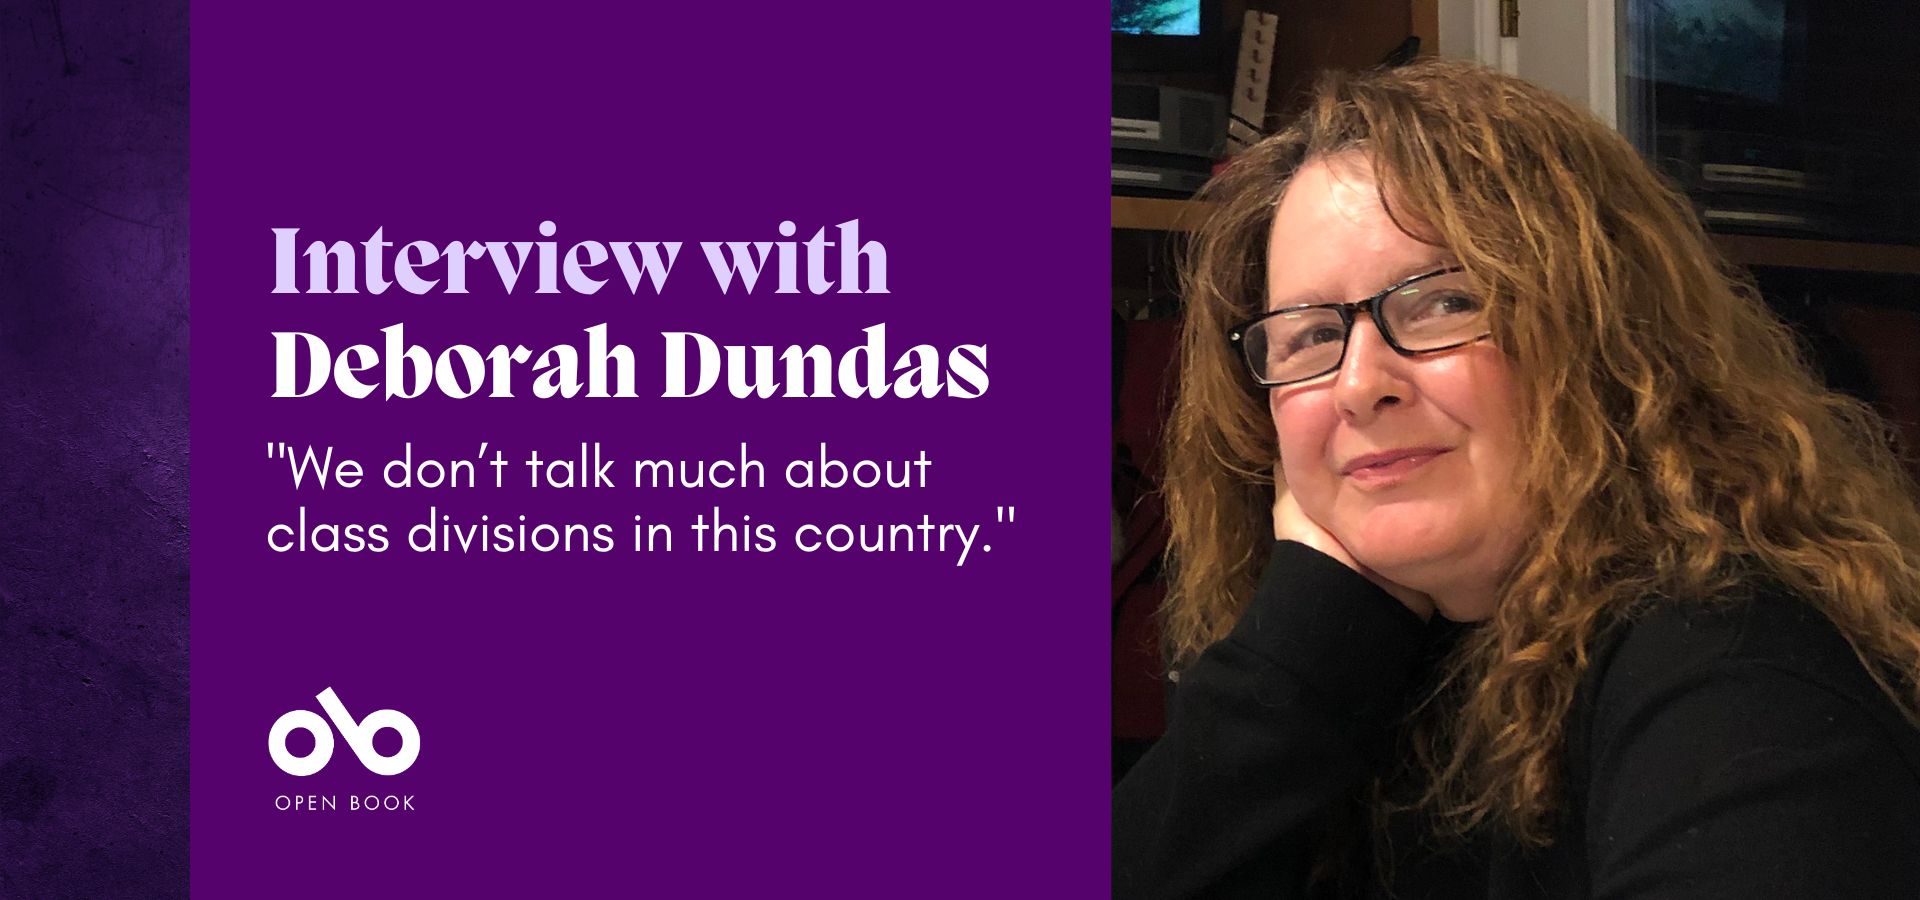 purple banner image with photo of writer Deborah Dundas and text reading "Interview with Deborah Dundas. We don’t talk much about class divisions in this country". Open Book logo bottom left